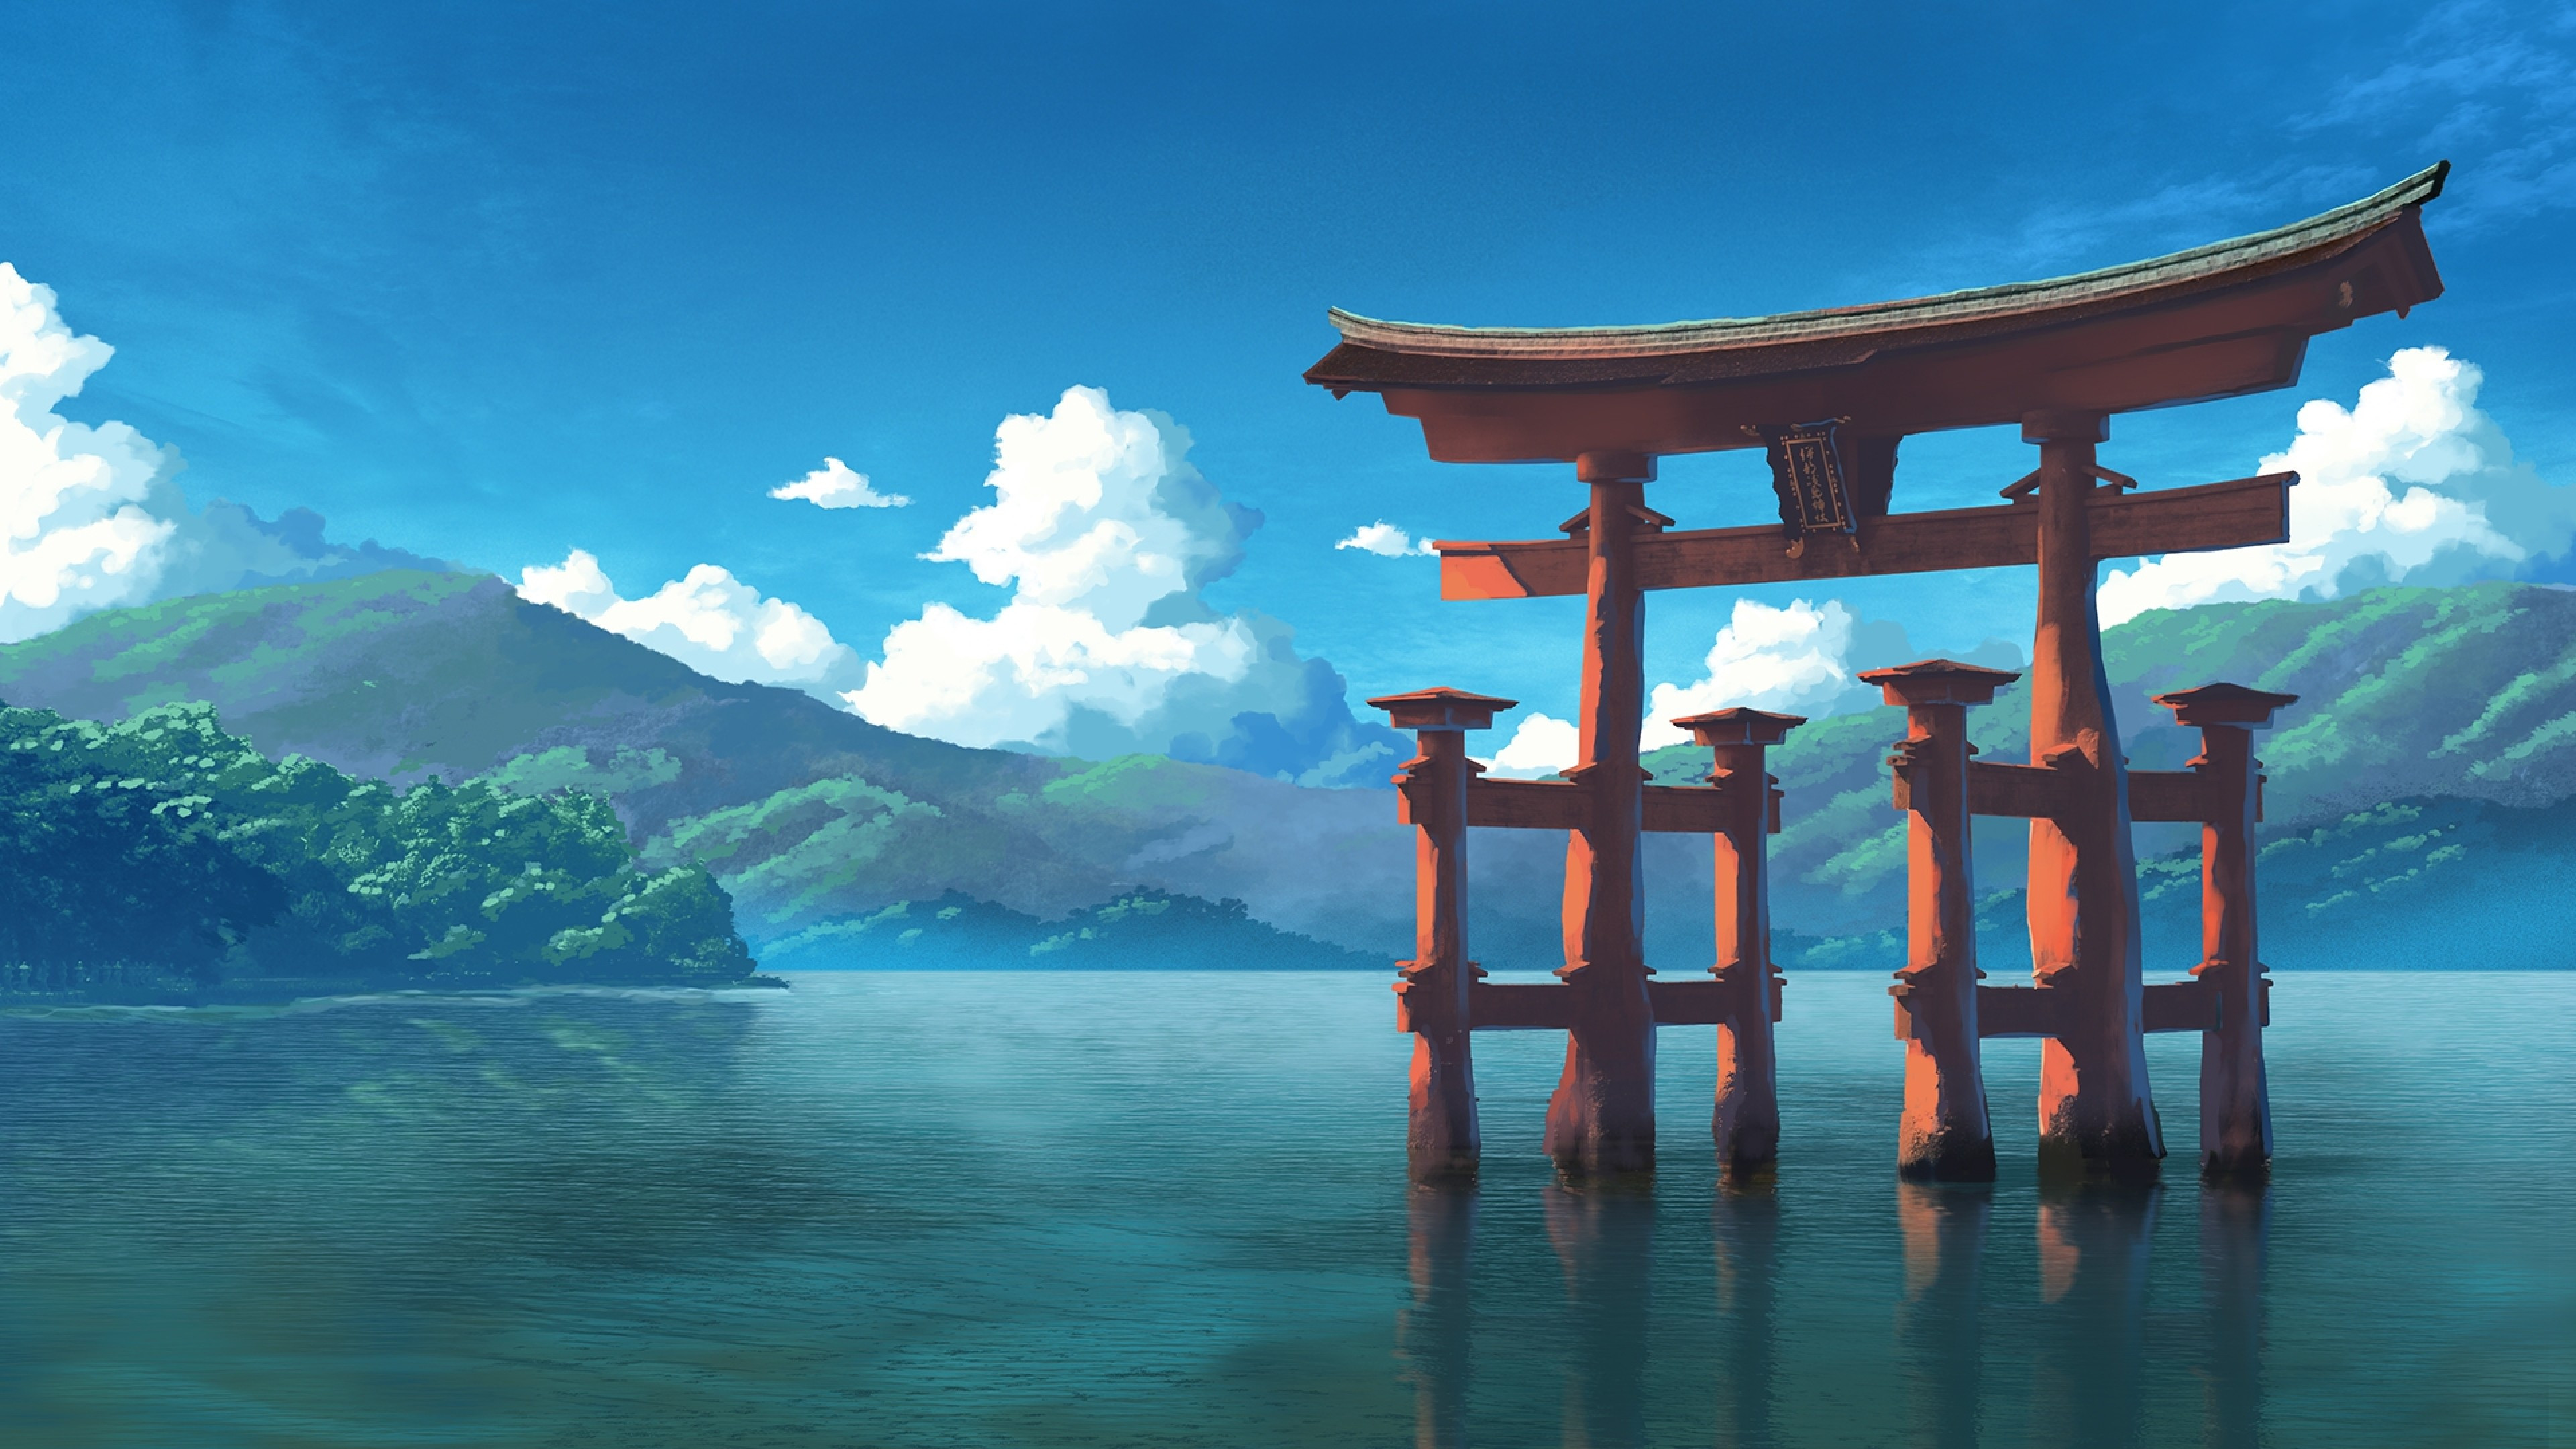 Download 3840x2160 Anime Landscape, Shrine, Lake, Torii, Clouds, Sky, Painting Wallpaper for UHD TV